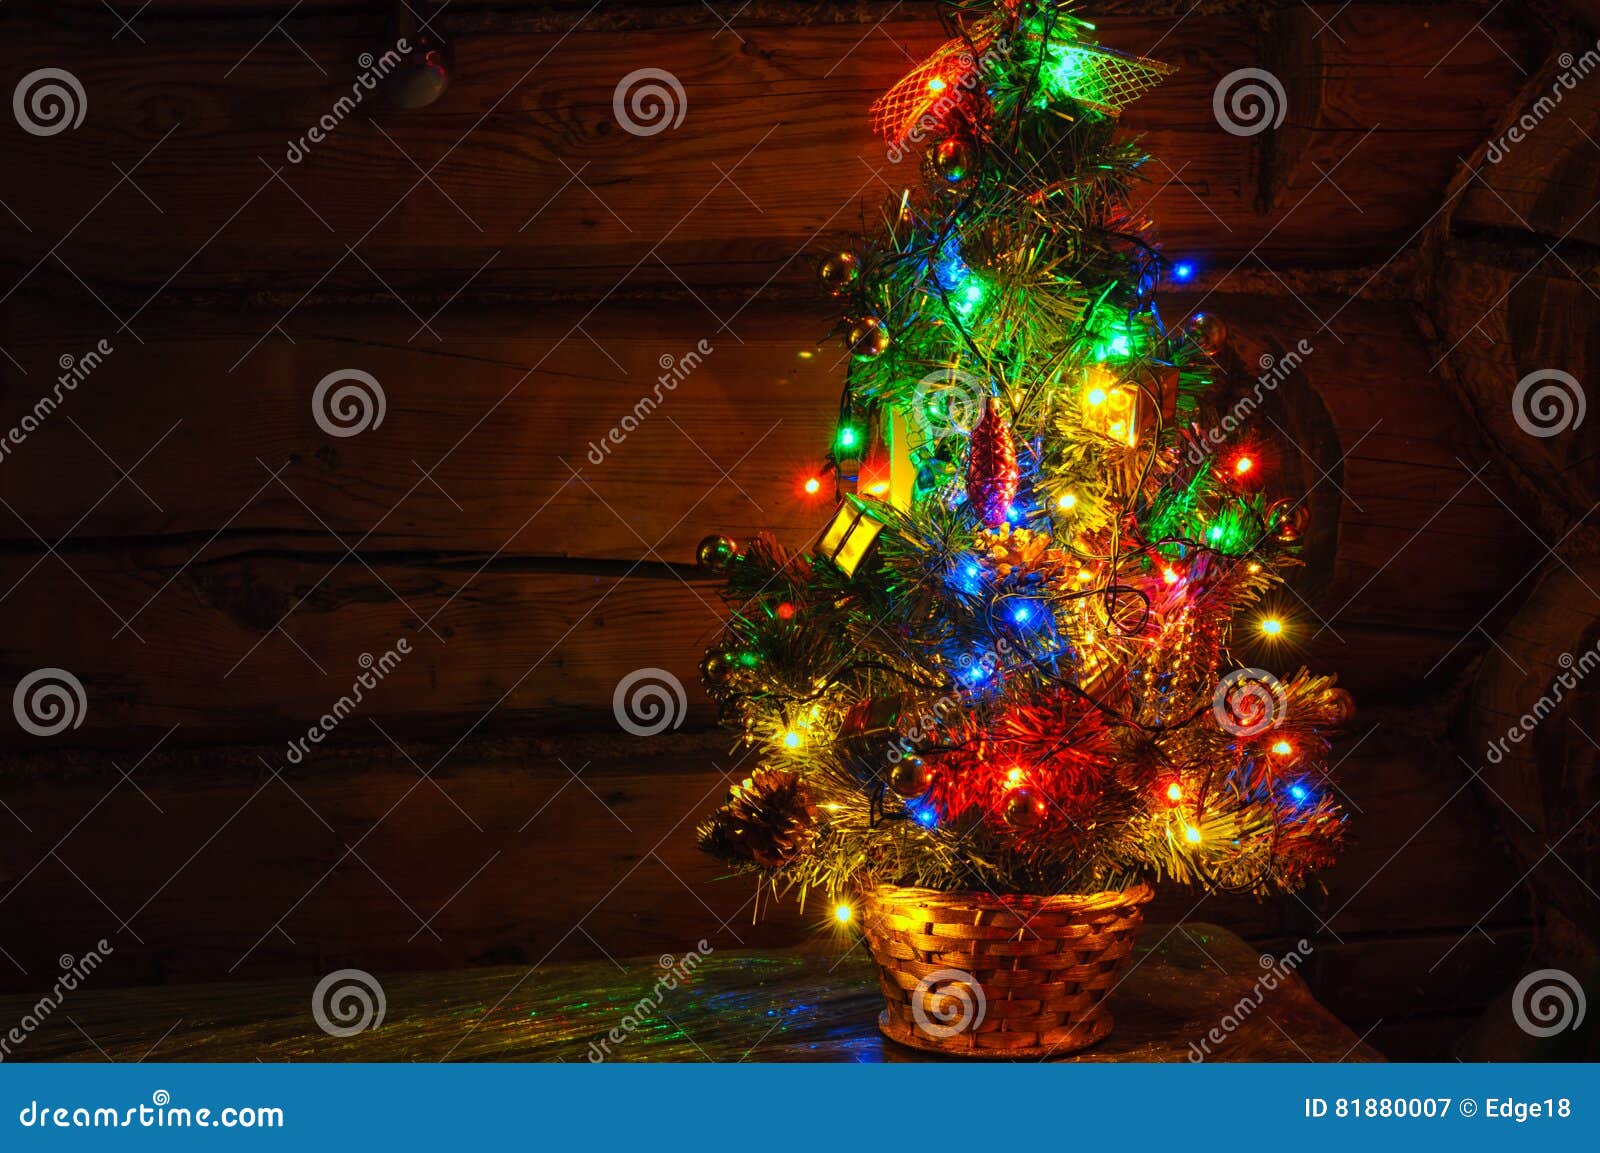 Small Christmas Tree With Multi Colored Lights At Dark